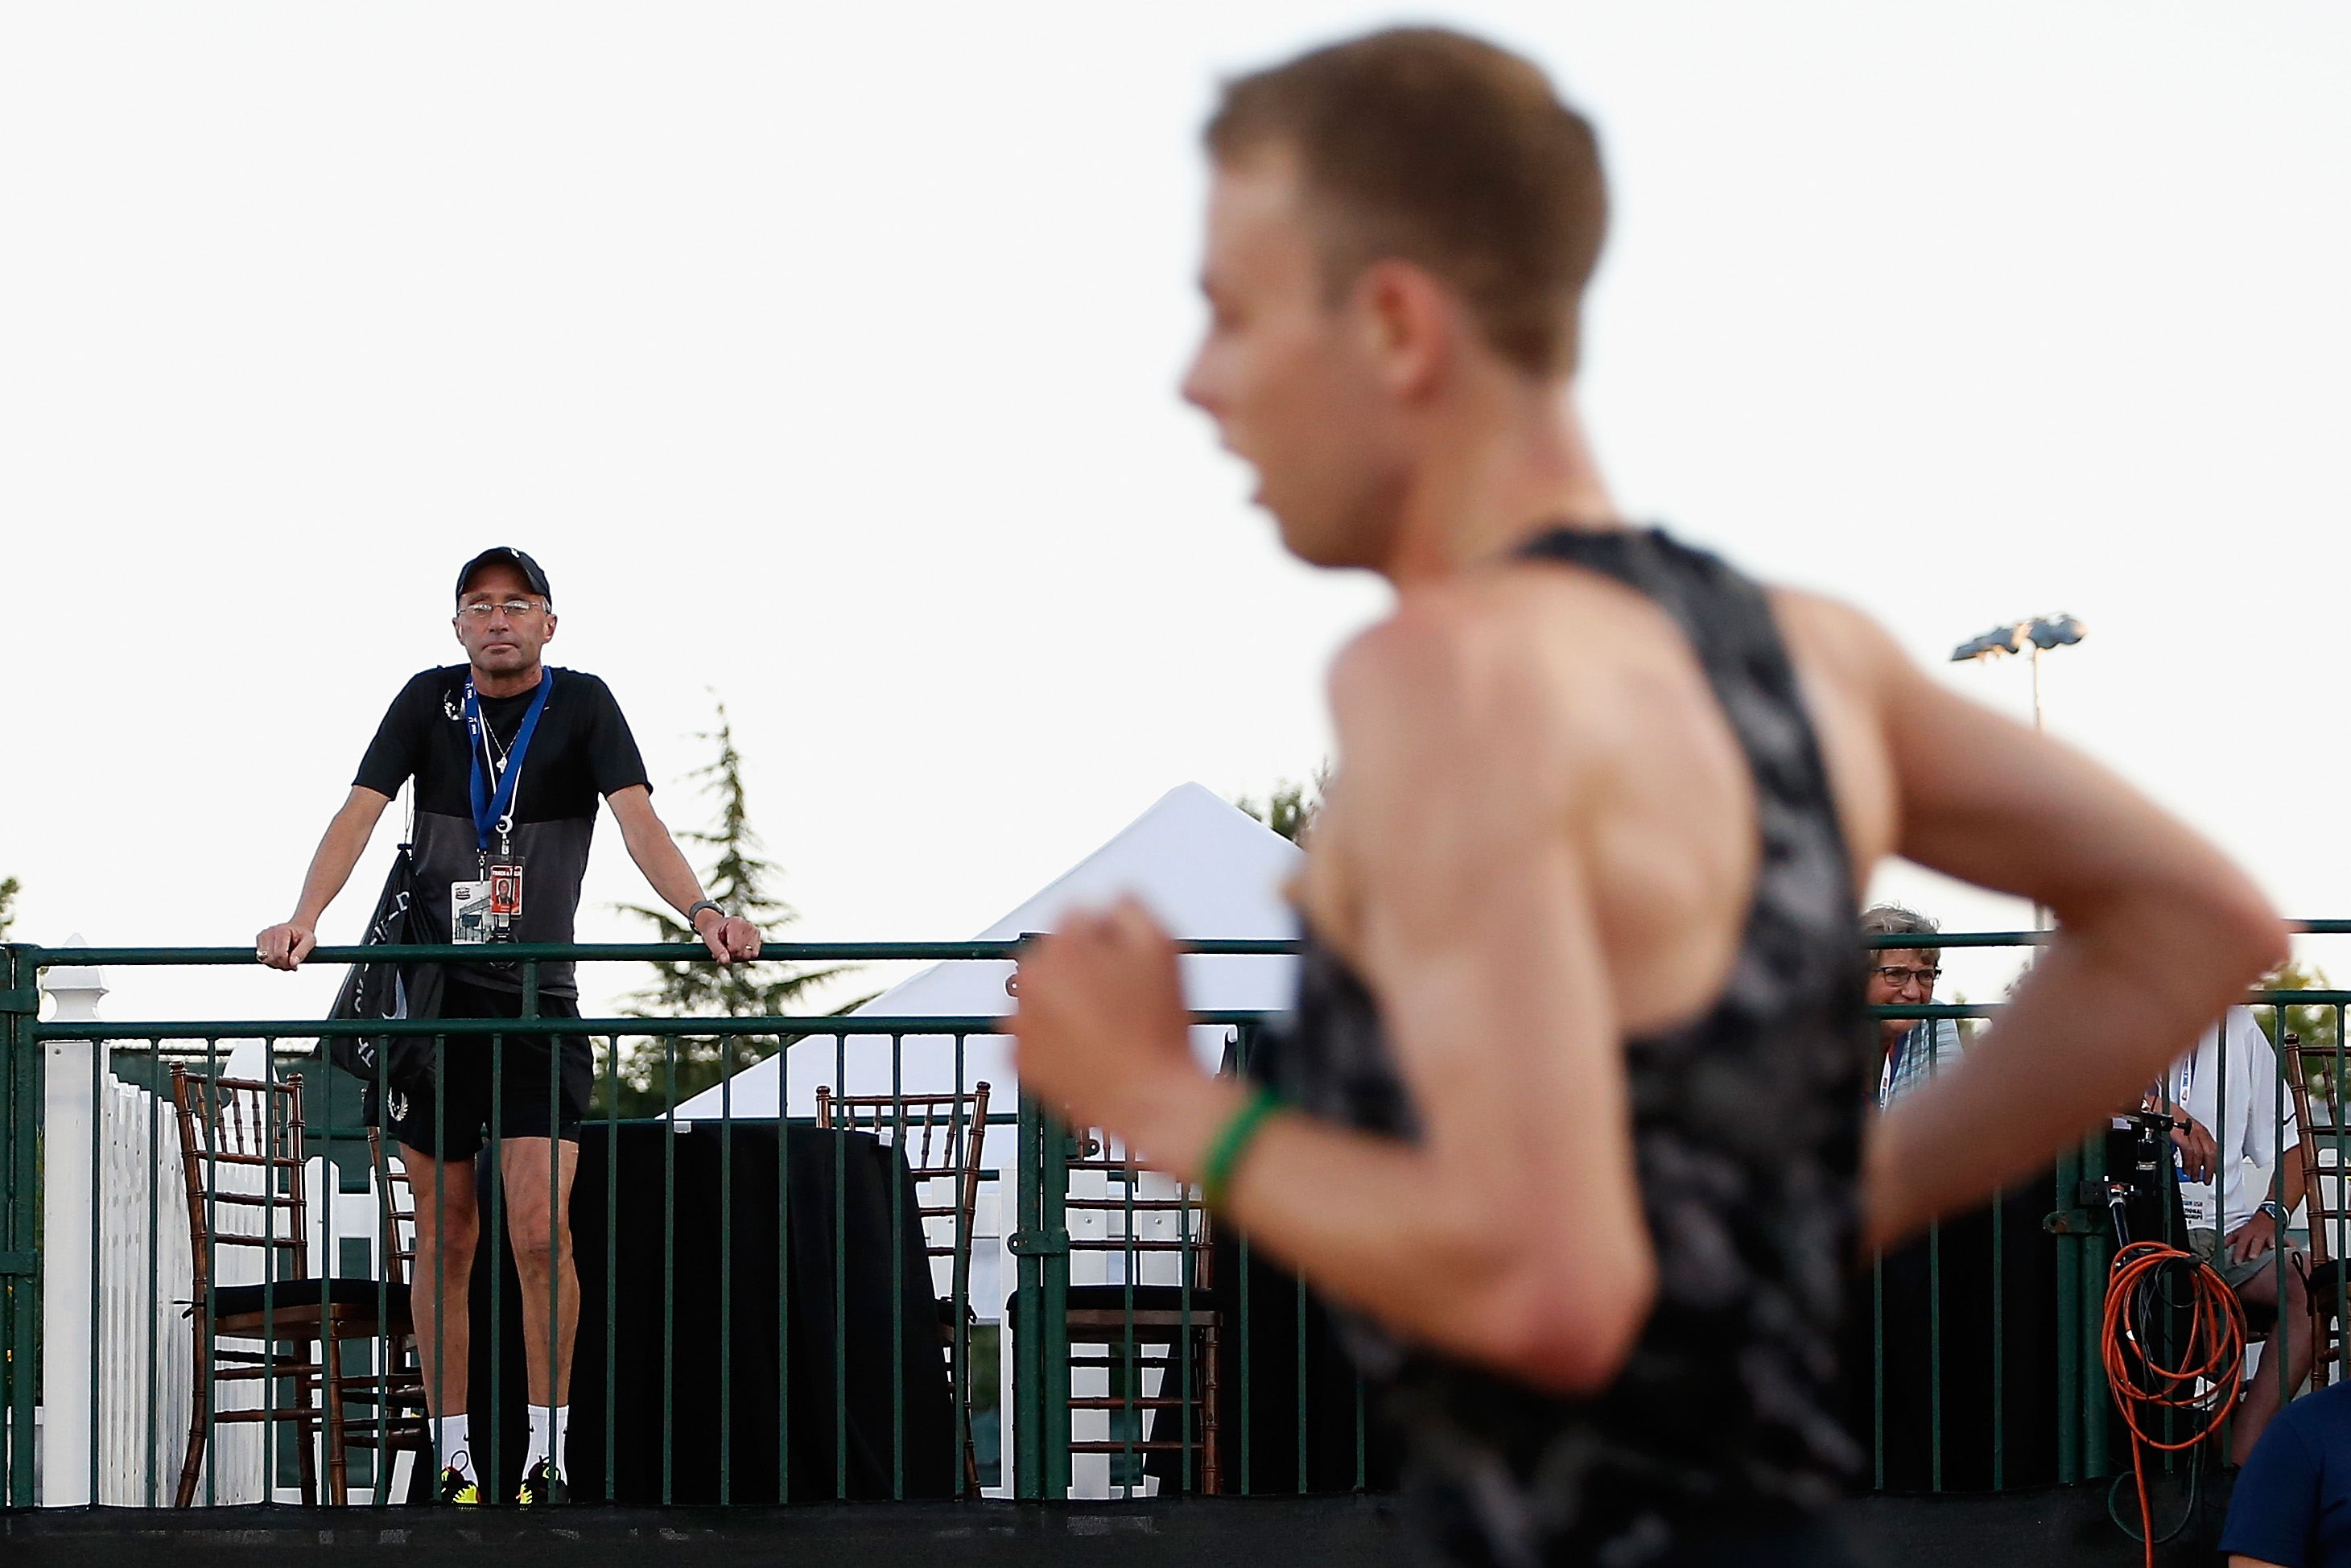 Alberto Salazar, left, looks on as Galen Rupp competes in Eugene, Oregon in 2015